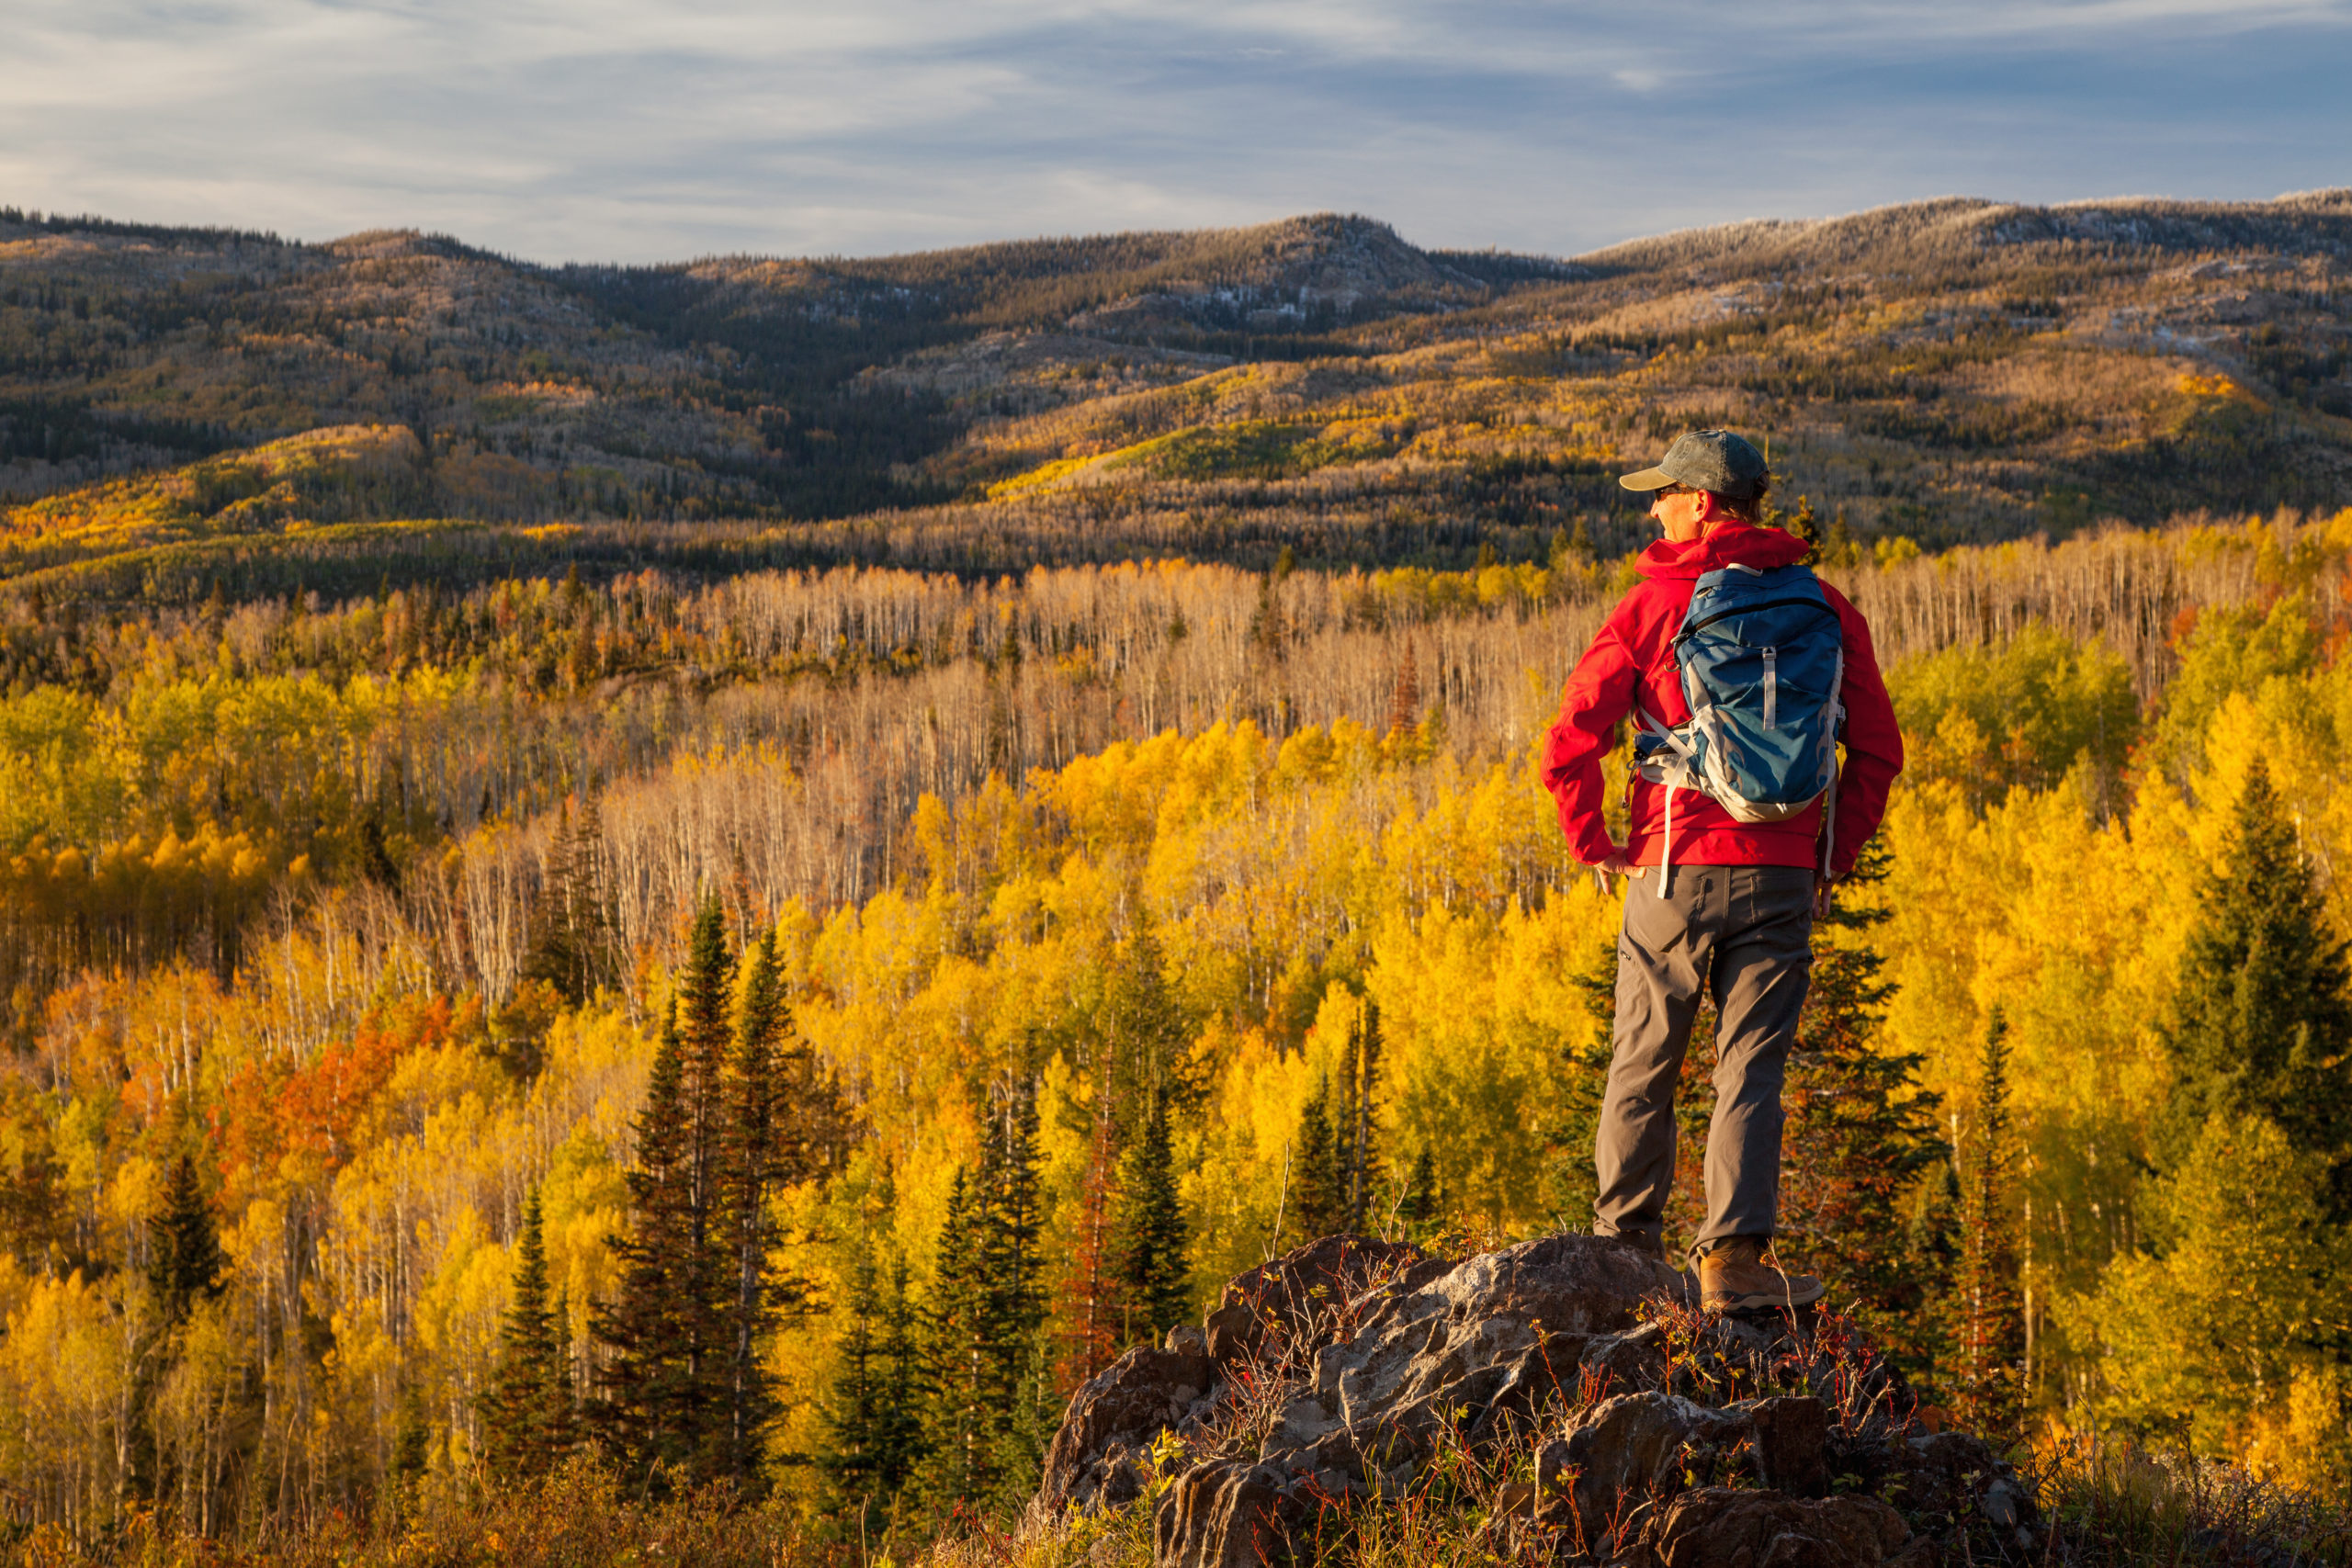 A male hiker stands on a rock to take in the autumn colored aspen trees in the mountain landscape near Steamboat Springs, Colorado.